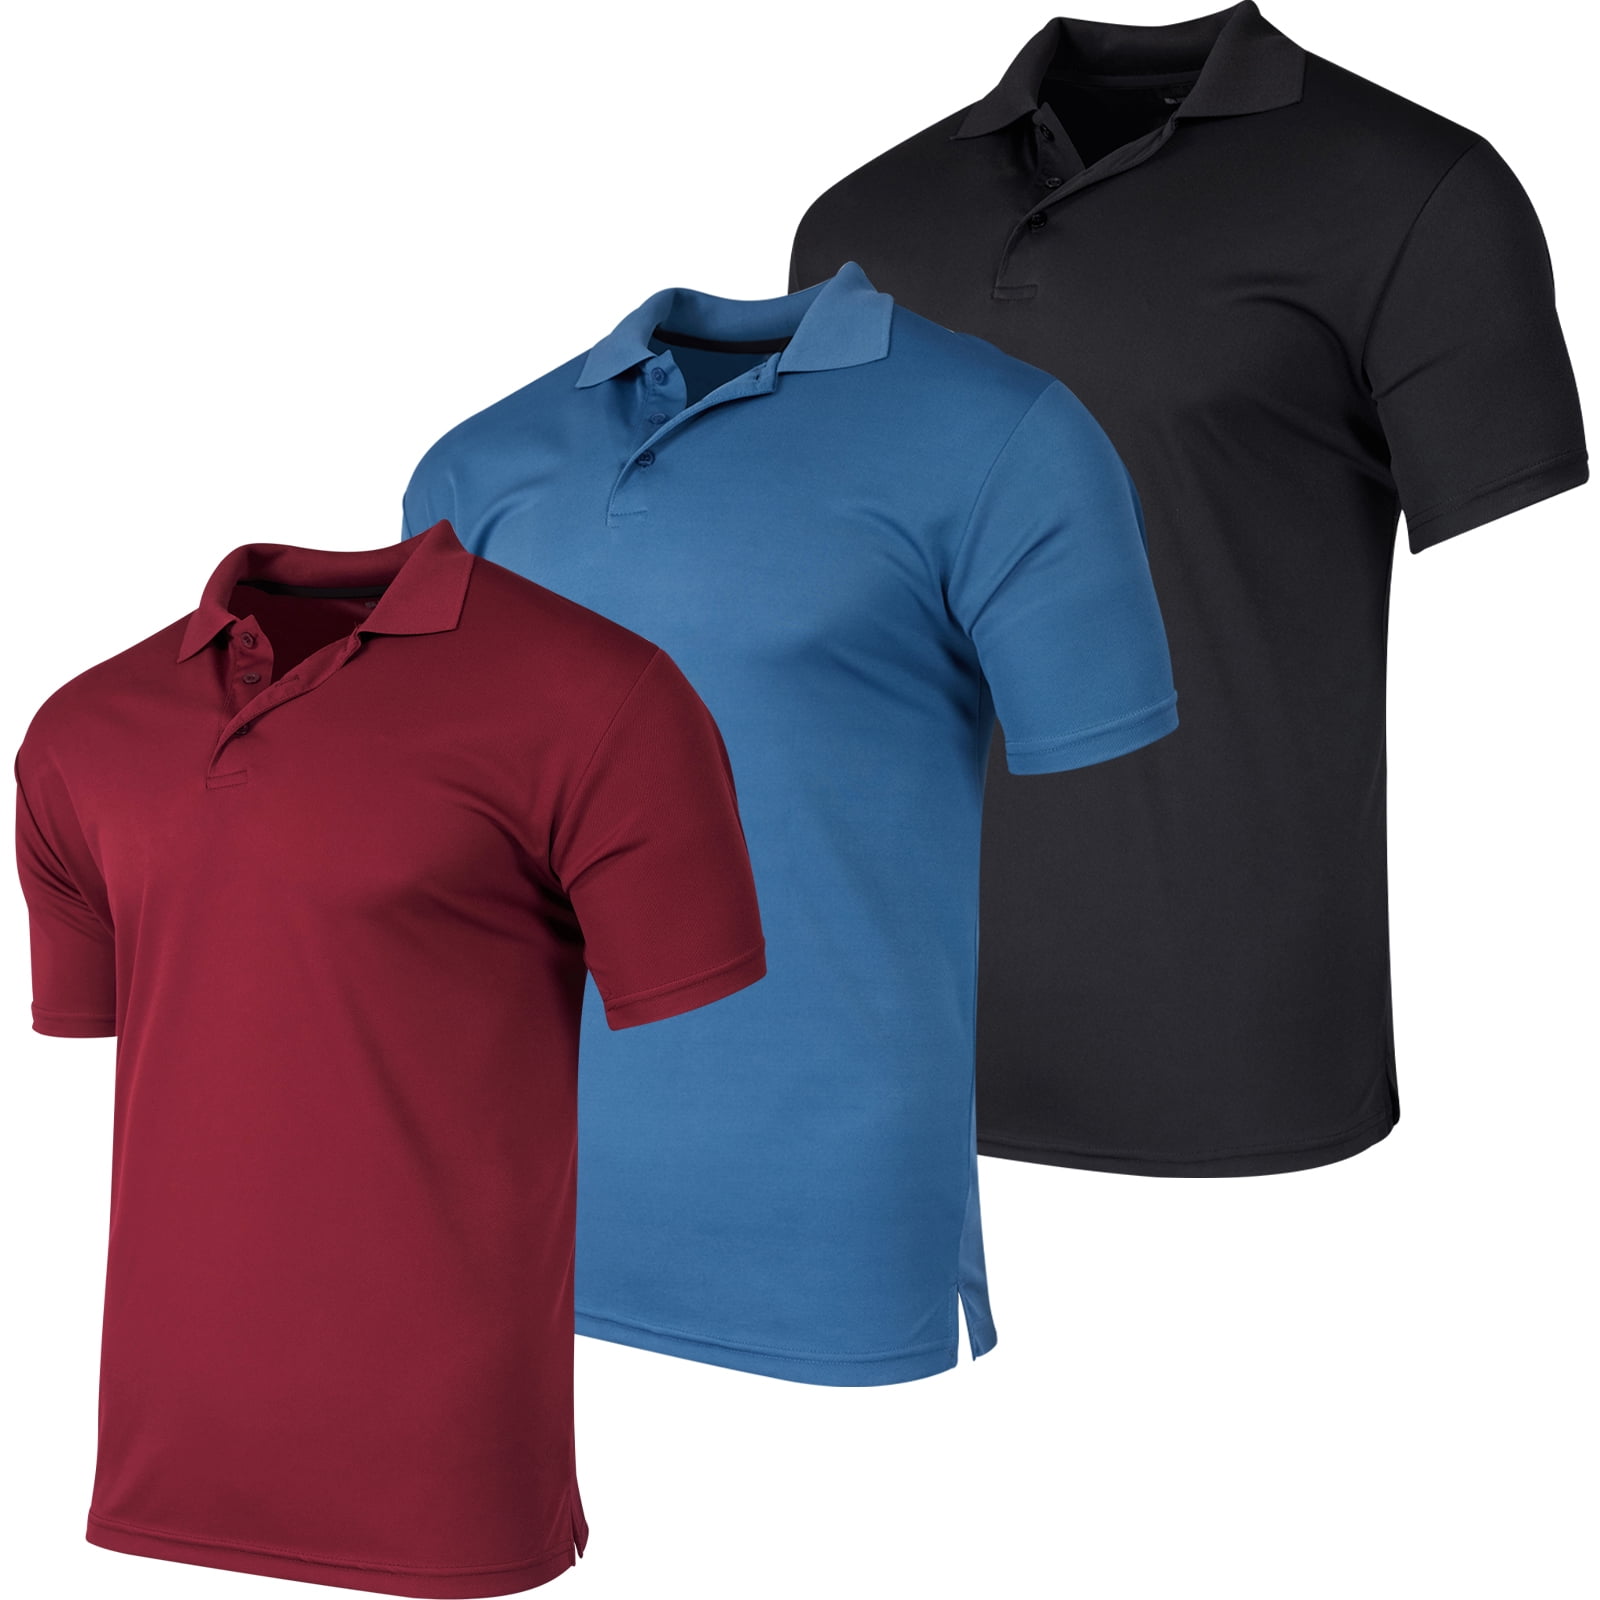 Real Essentials 3 Pack: Men's Quick-Dry Short Sleeve Athletic ...